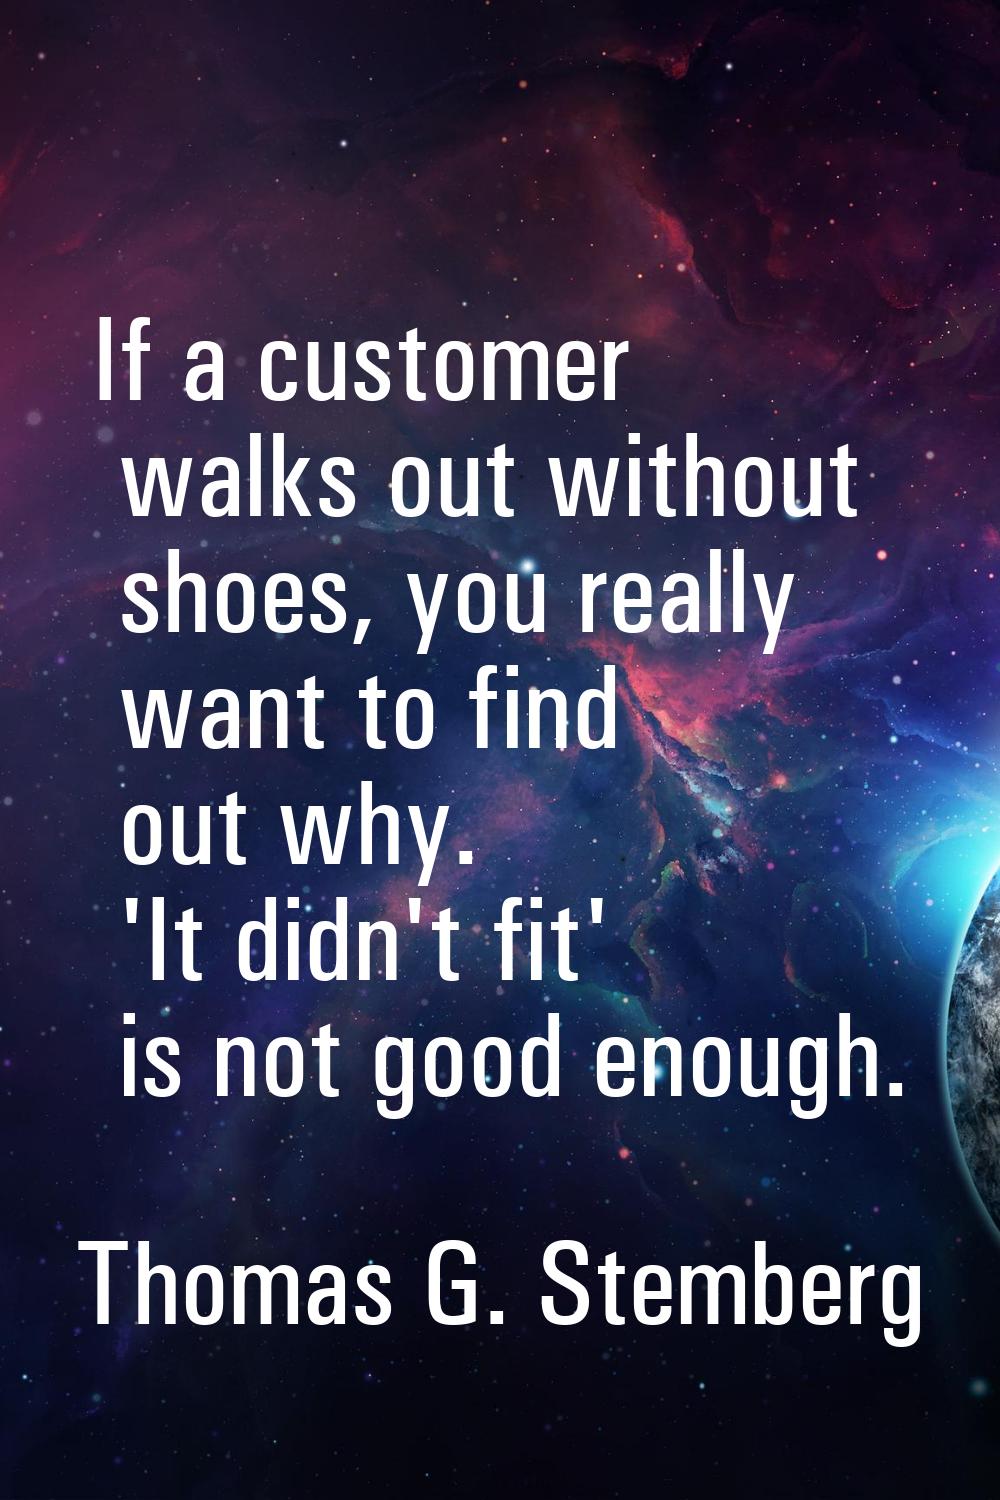 If a customer walks out without shoes, you really want to find out why. 'It didn't fit' is not good